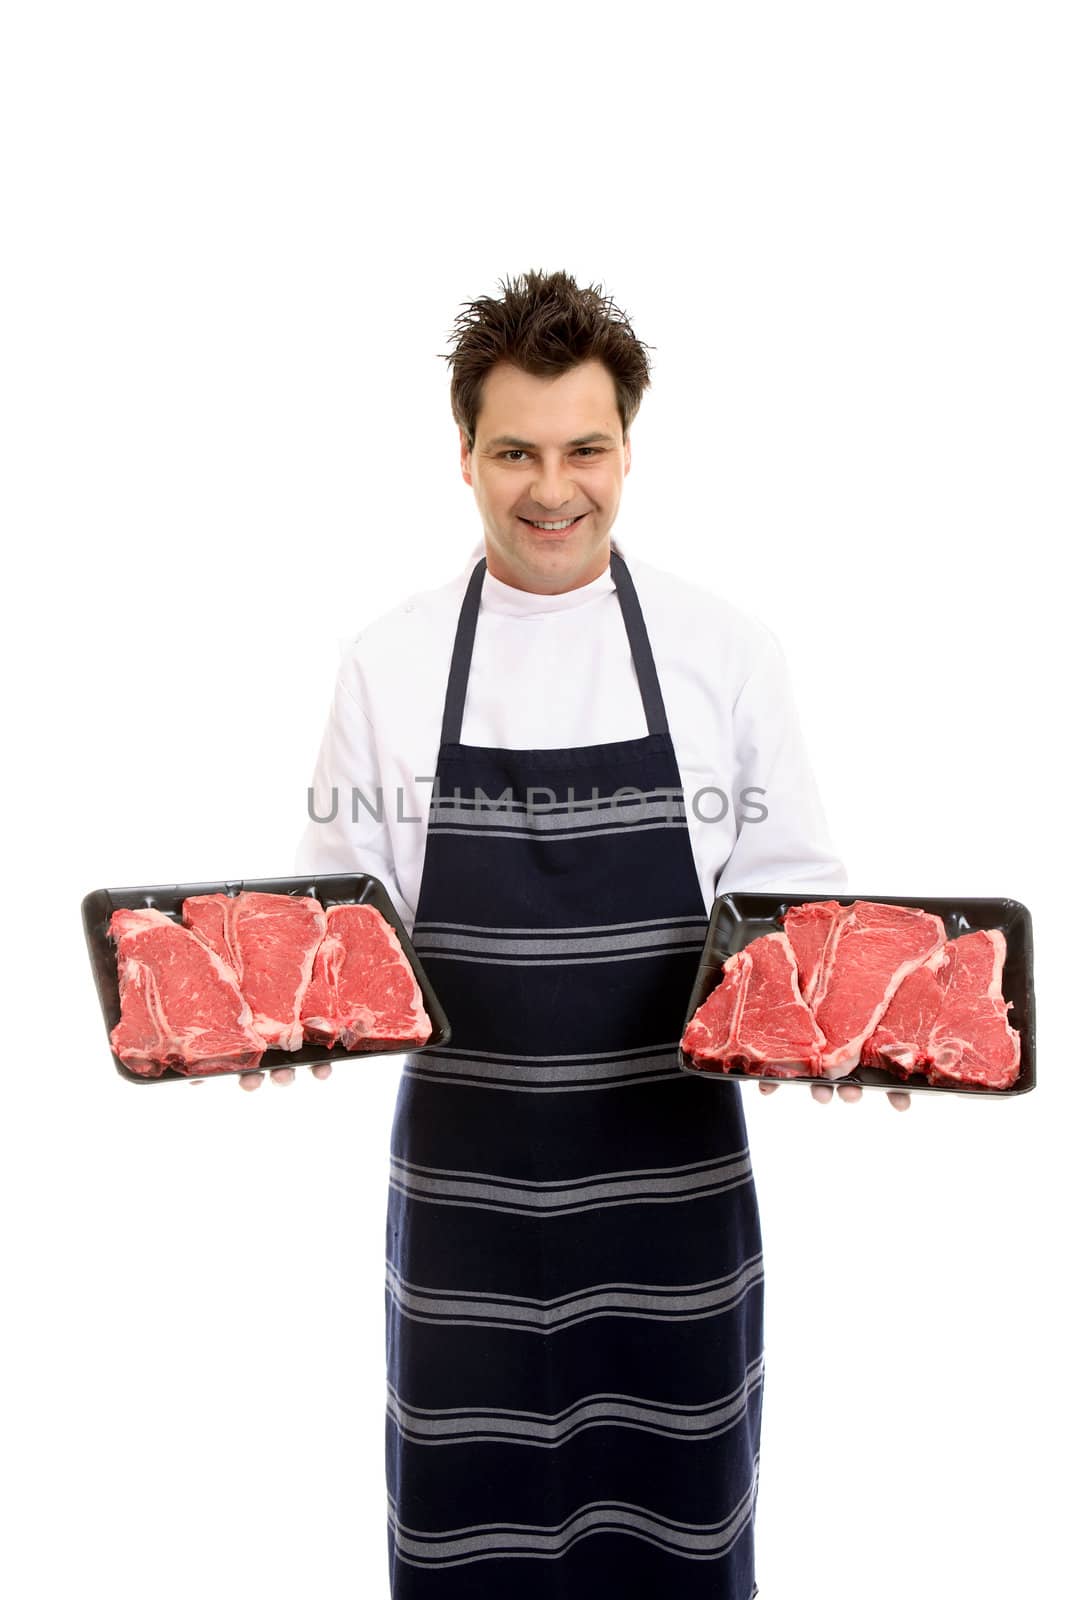 Butcher with trays of T-bone steak by lovleah